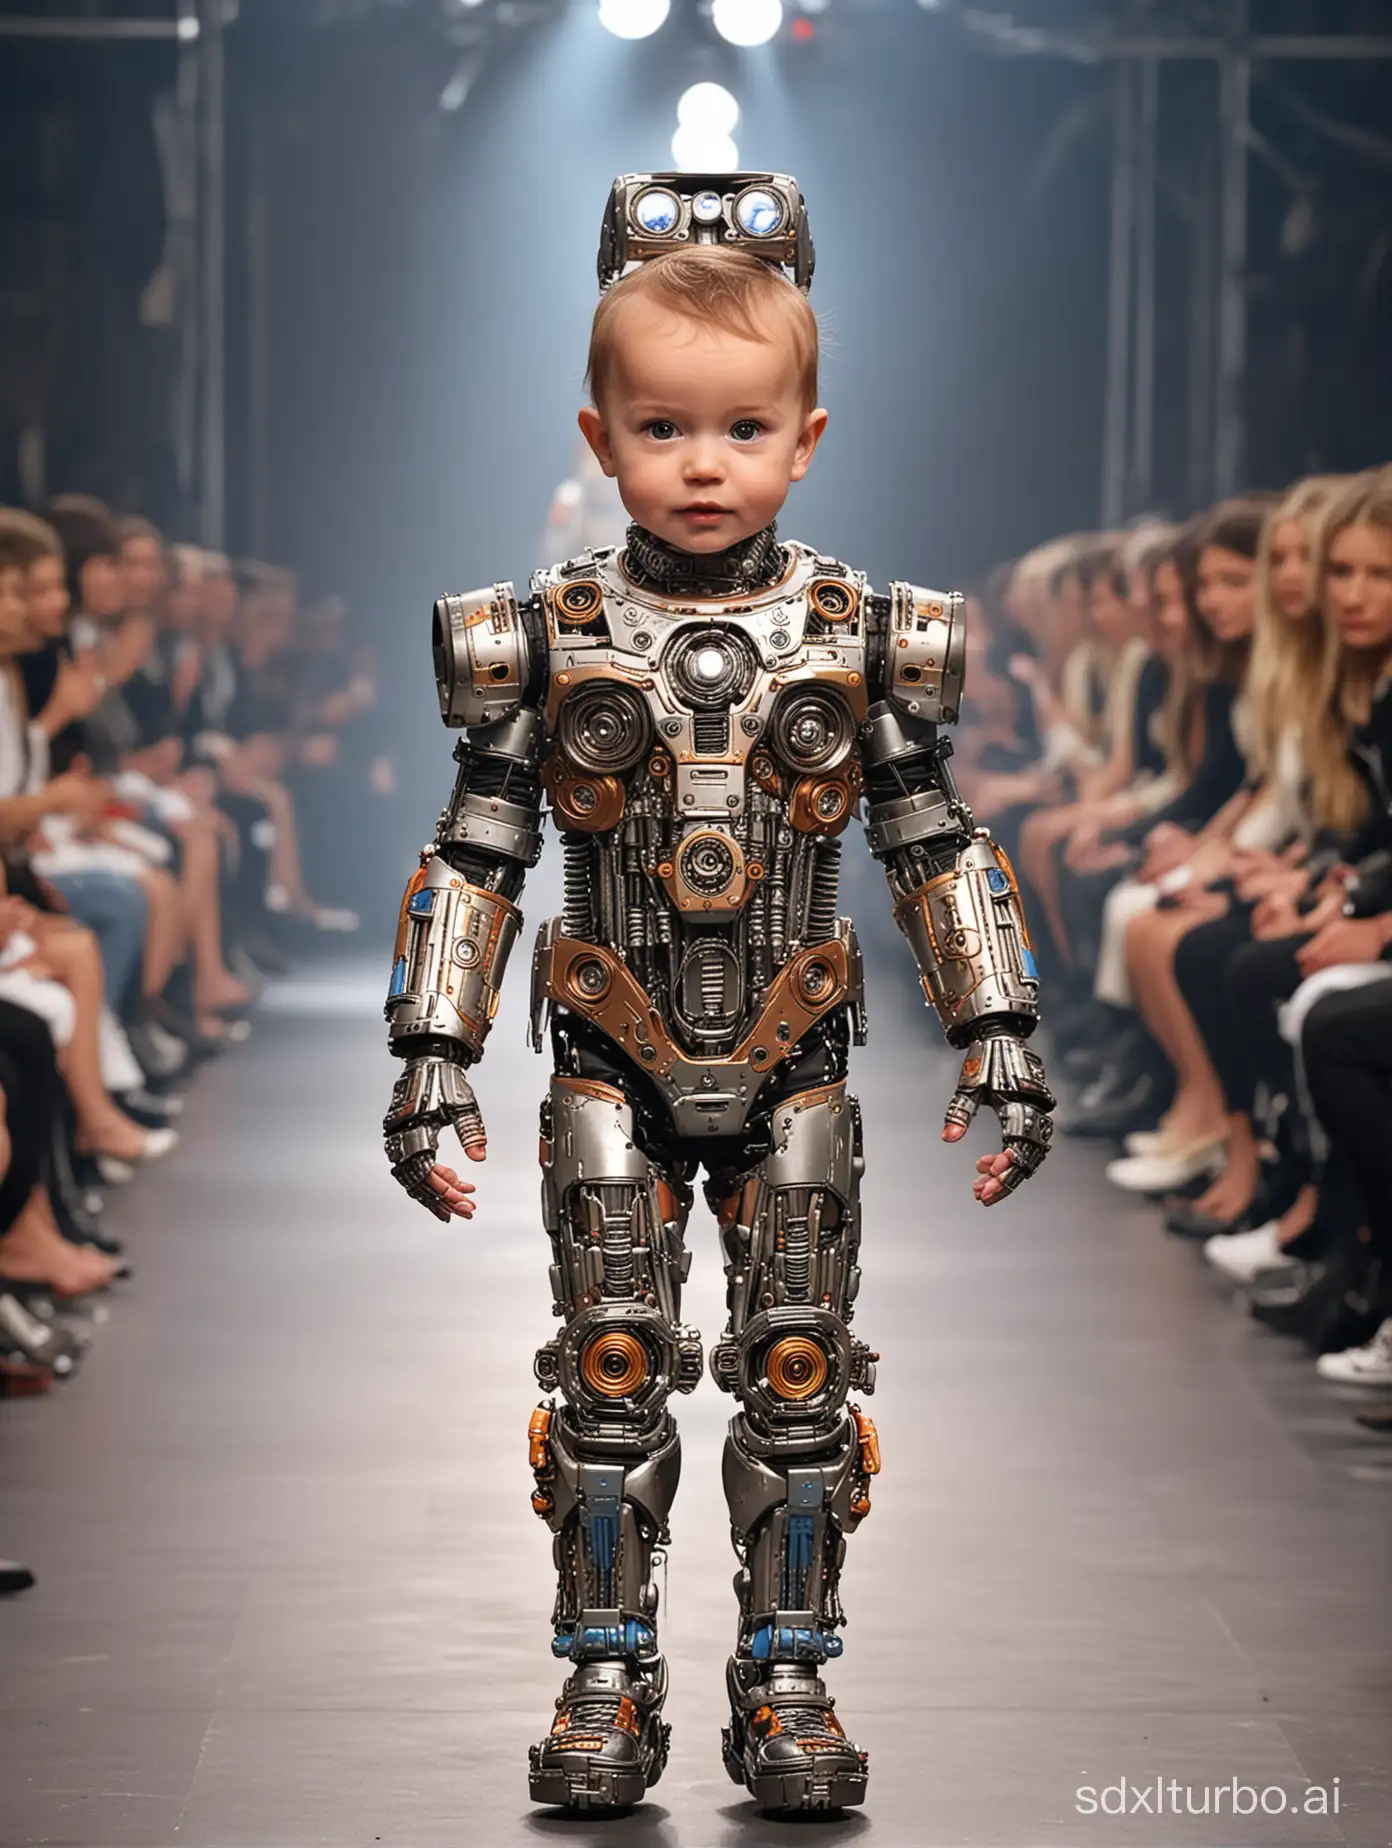 In the Paris Collection, a baby model dressed as a robot 🤖 walks the runway, a baby 👶 top model, walking, (full body shot), (audience on both sides), Paris Collection runway, Paris Collection's runway, (eccentric fashion), outrageous fashion, flashy fashion, Paris Collection